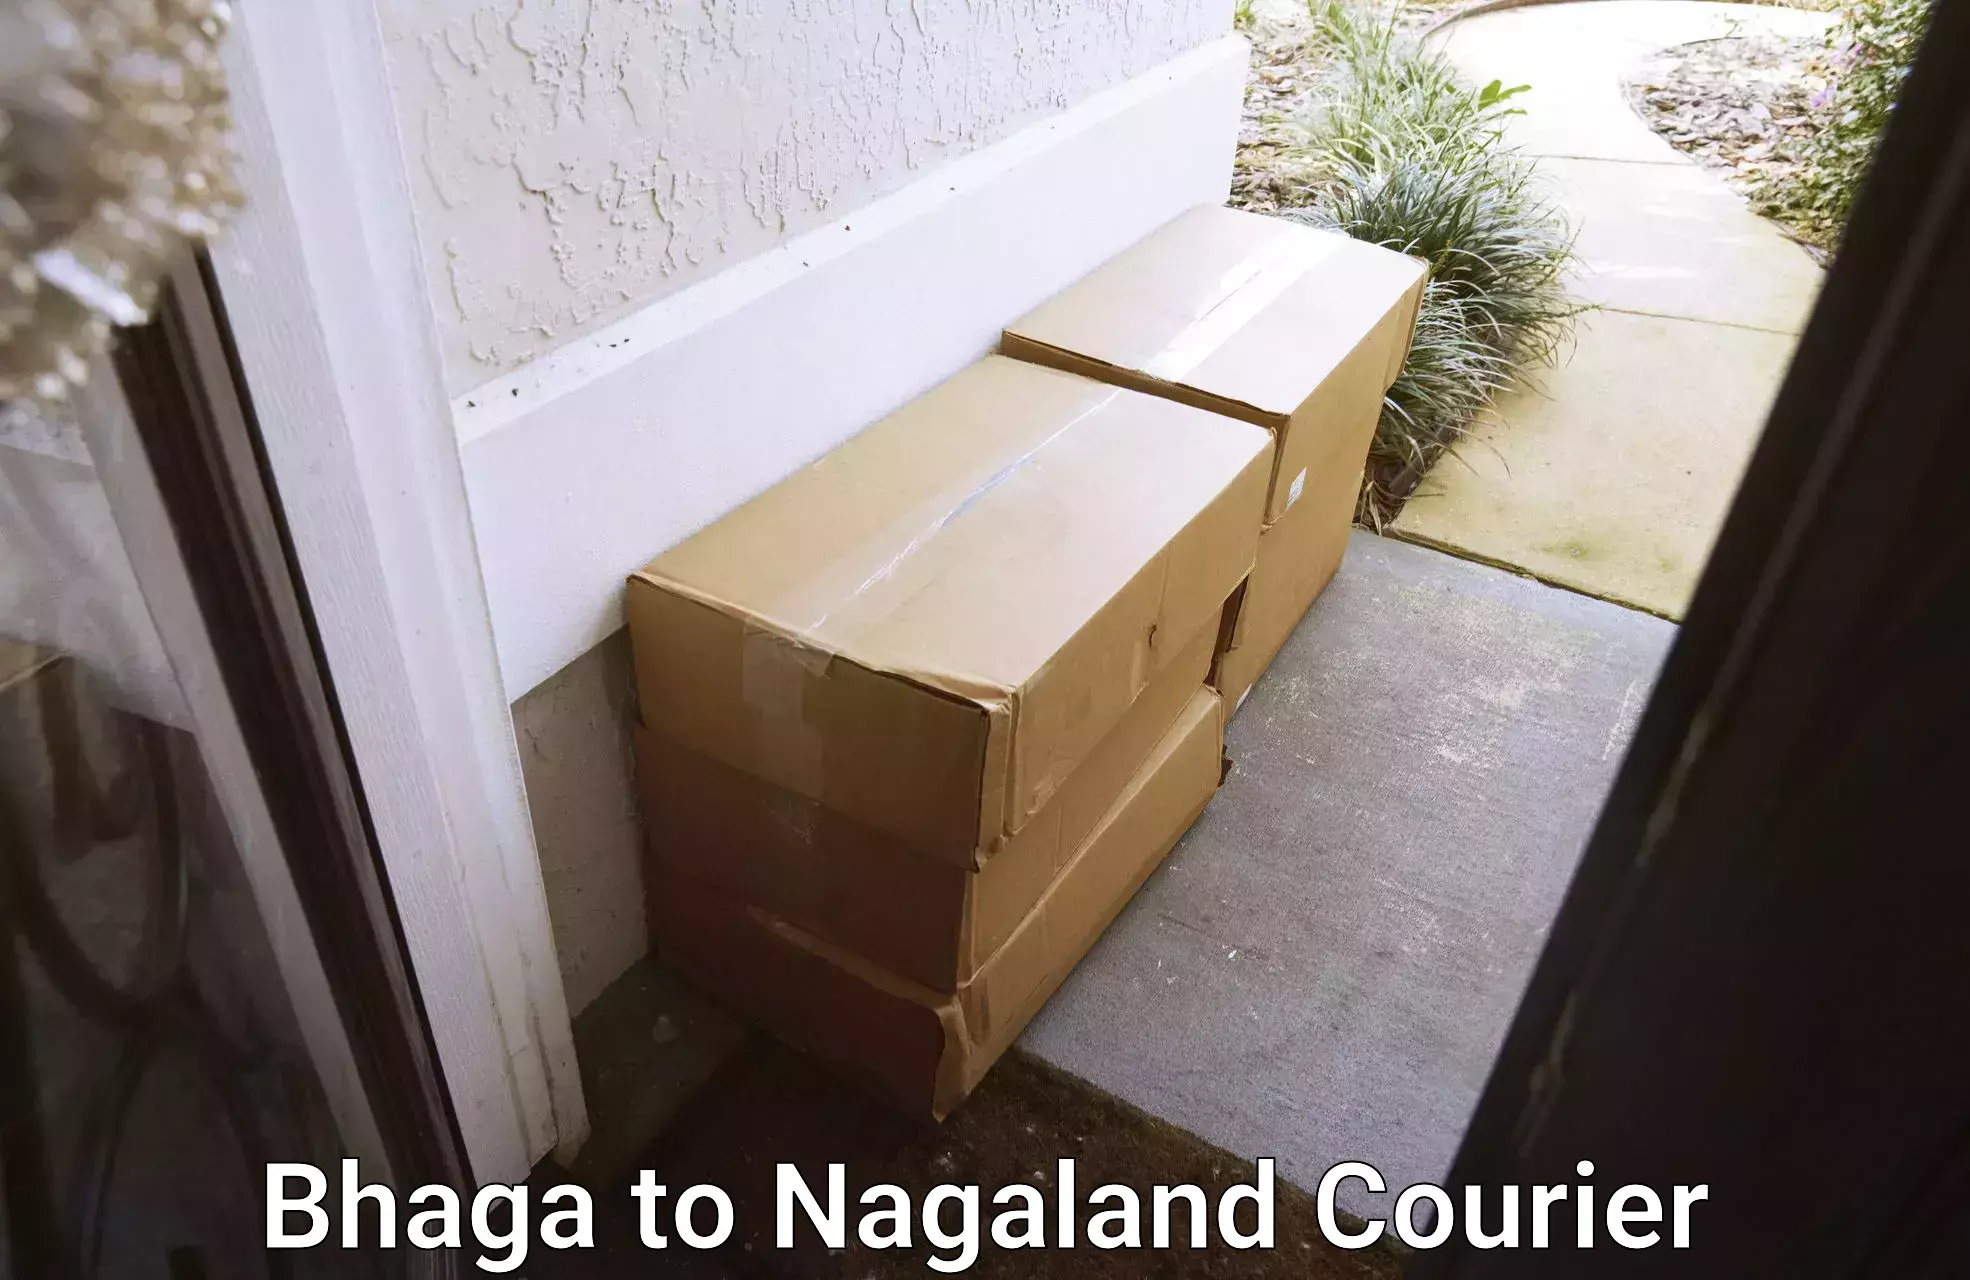 Express delivery network Bhaga to Nagaland